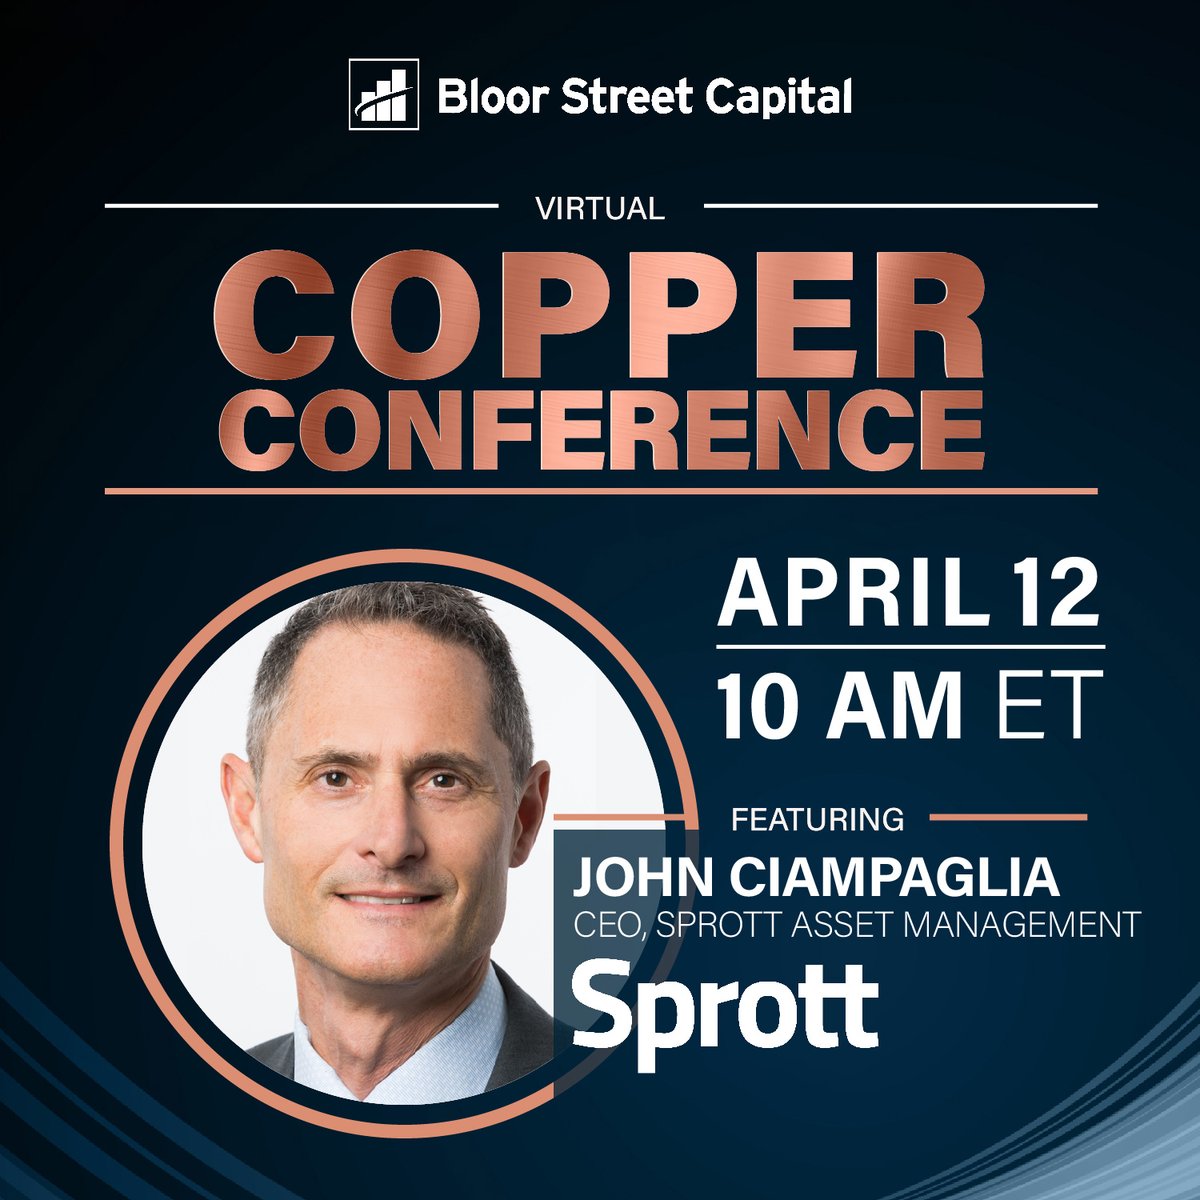 John Ciampaglia of @Sprott discusses what is driving the #copper price and why it is going much higher. Replay bit.ly/3JdVxpn